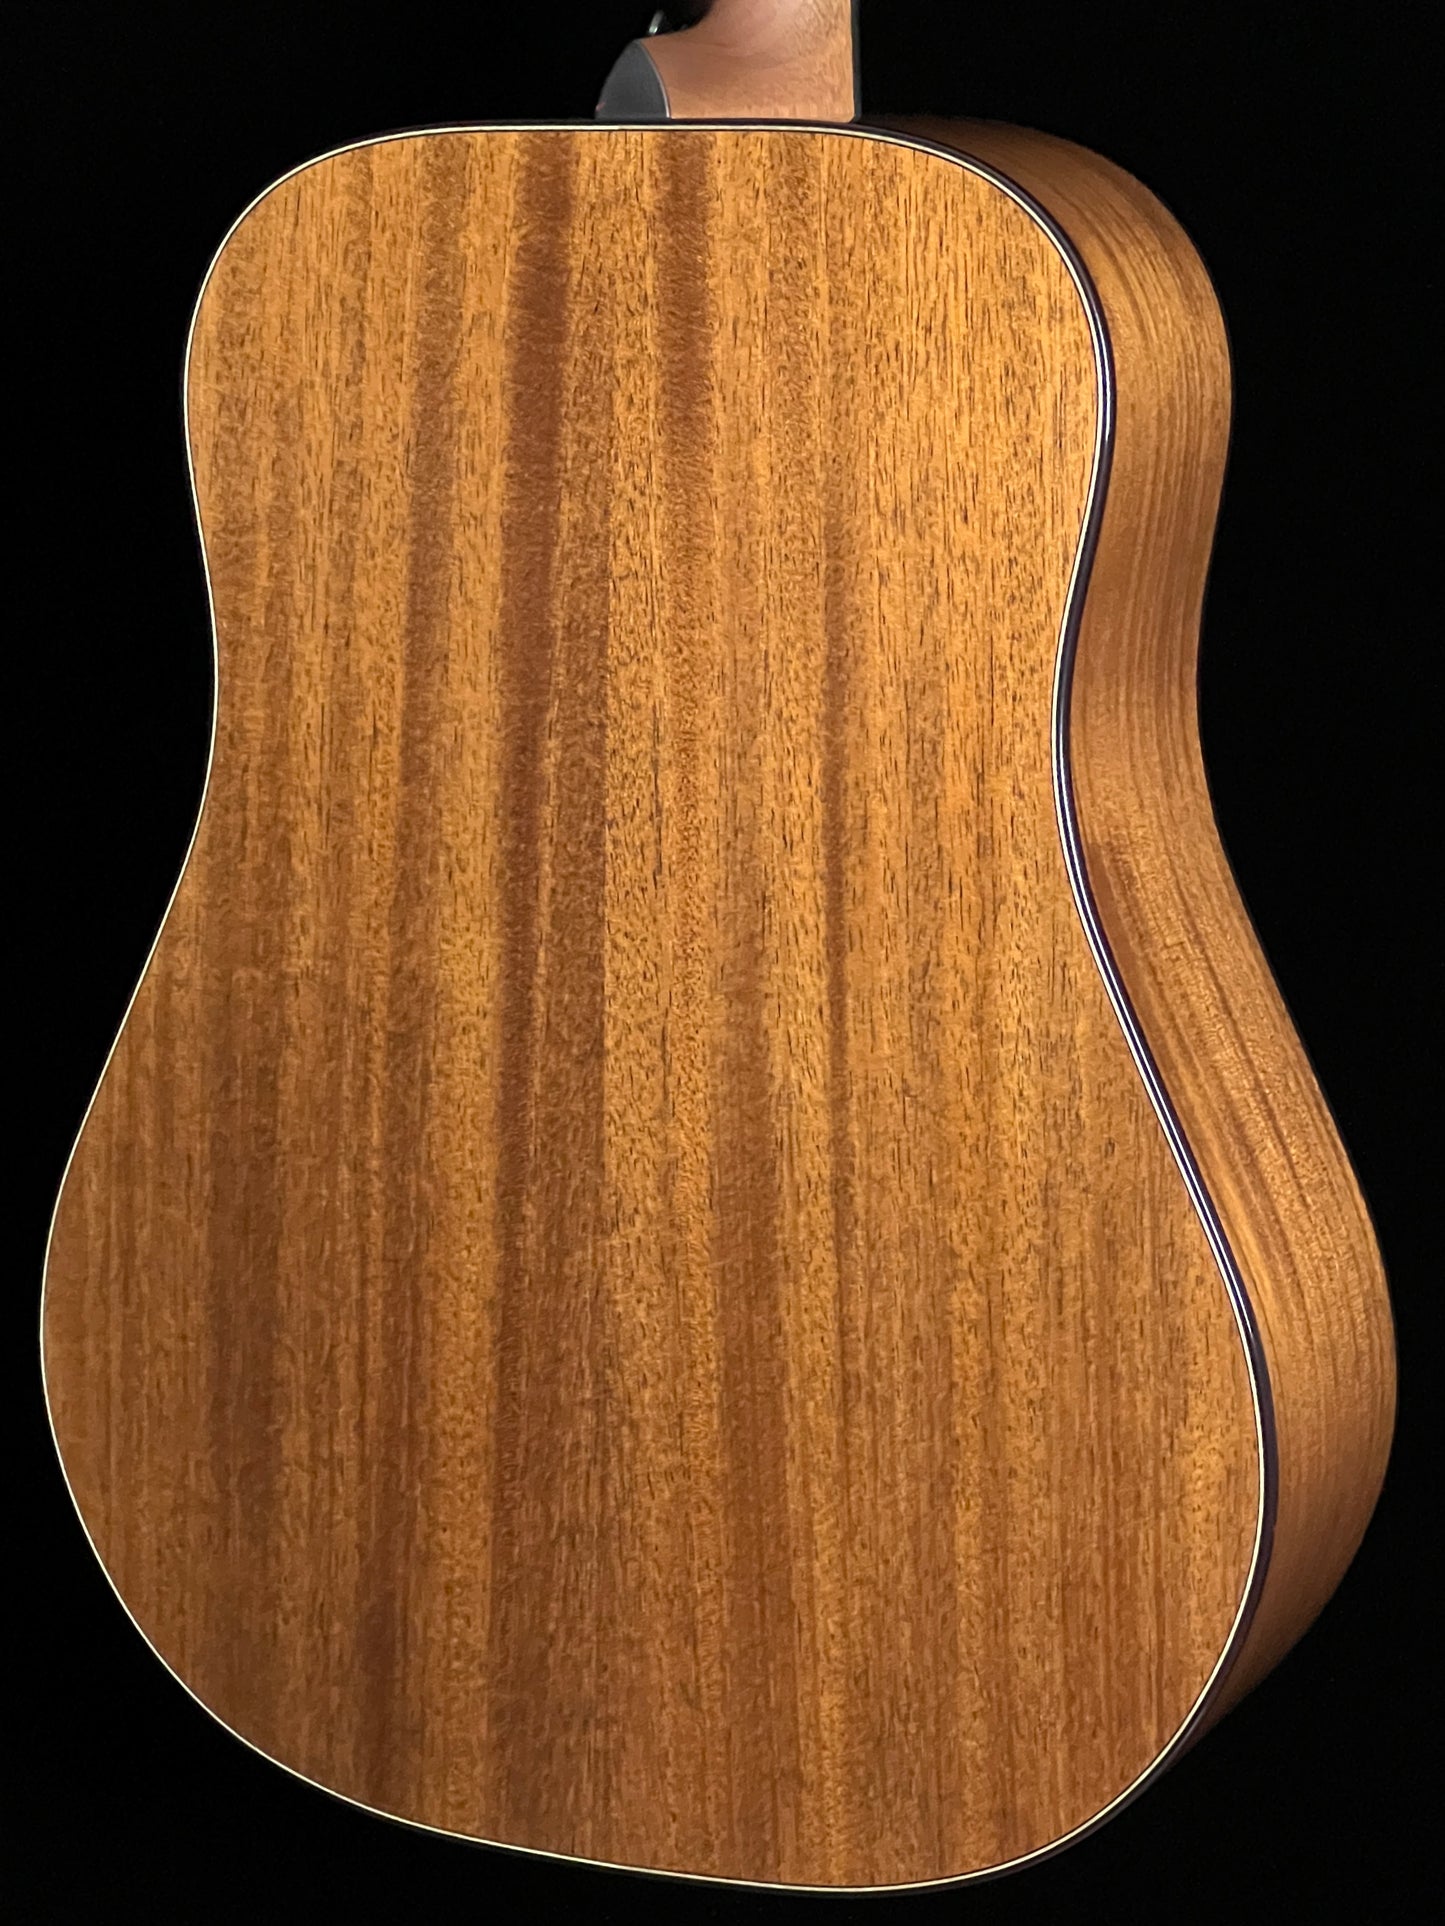 Bedell 1964 Series Special Edition Dreadnought Adirondack Spruce/Honduran Mahogany Acoustic Guitar with K&K Pure Mini- New